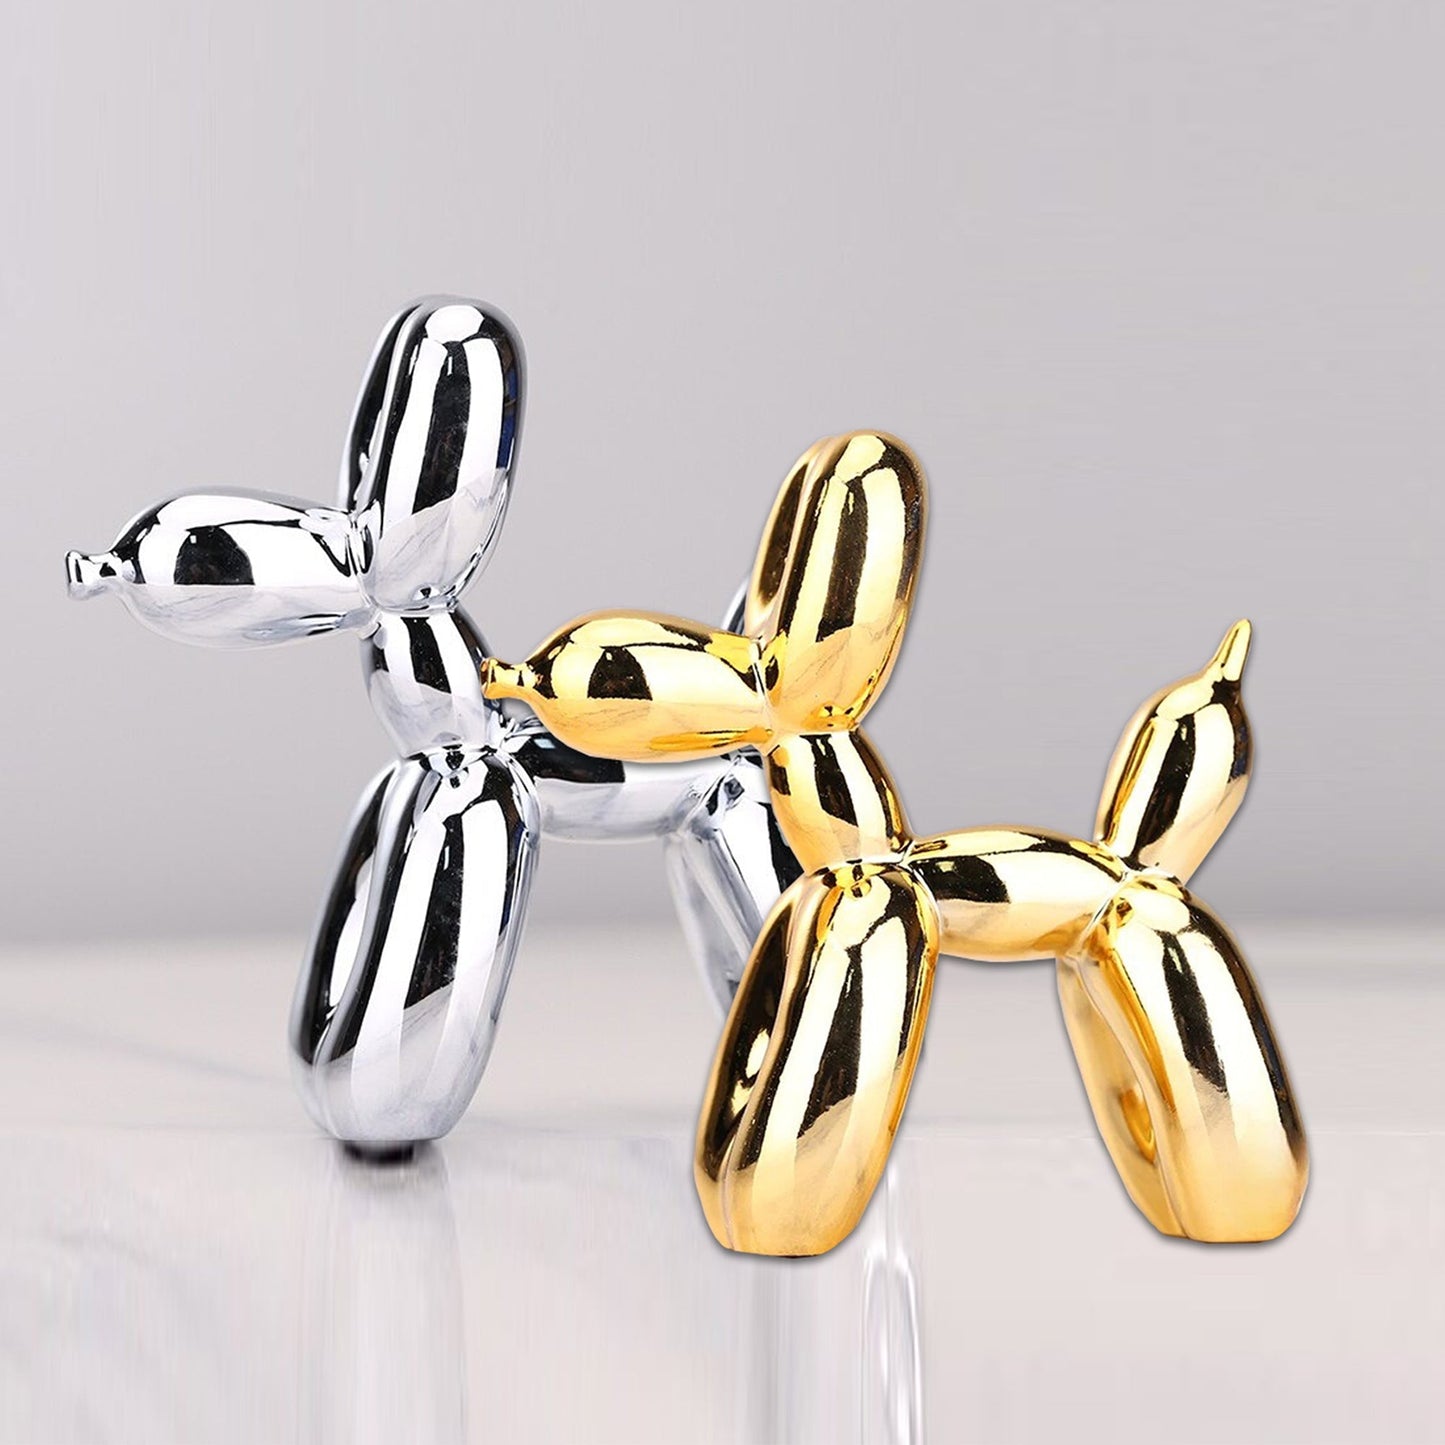 Electroplated Balloon Dog Sculptures - 2 Colours